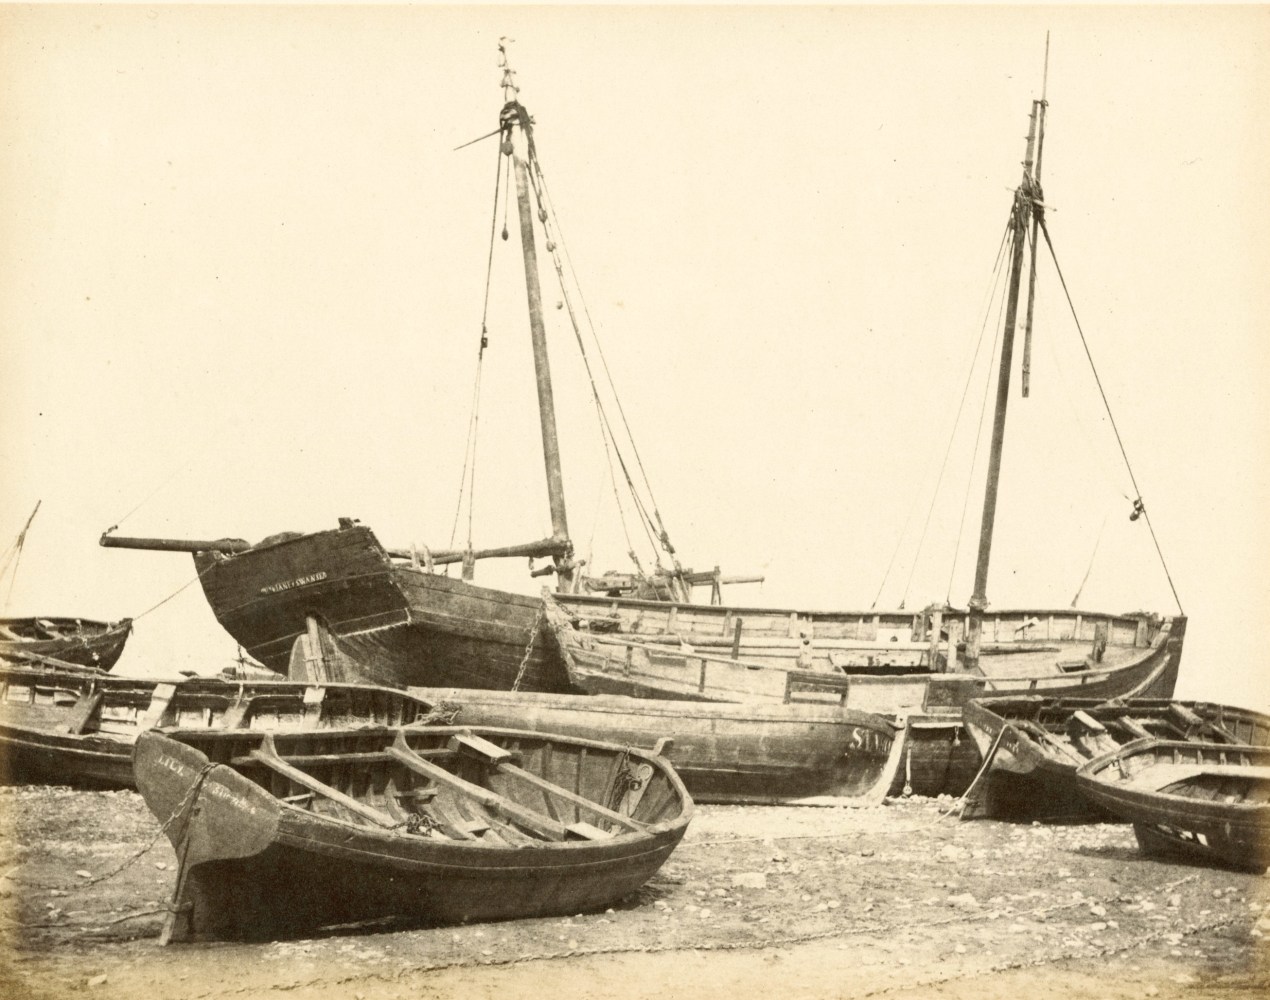 Hugh Owen&amp;nbsp;(English, 1808-1897)
Oyster boats, Swansea
Albumen print, 1860s-1870s, from a paper negative, before 1855
17.3 x 22.2 cm mounted on 26.0 x 28.3 cm album sheet
Numbered &amp;quot;60&amp;quot; in pencil on mount

By the mid 1850s when the glass wet collodion negative dominated British commercial photography, Hugh Owen remained loyal to Talbot&amp;#39;s calotype negative process on paper. Owen&amp;#39;s calotypes in the 1851 Great Exhibition so impressed the Commissioners that they hired him to record displays in the Crystal Palace. The following year, Owen became a member of the Founding Council of the Photographic Society and contributed regularly to their exhibitions. The oyster boats are beached by the low tide typical of Swansea&amp;#39;s extreme tidal swing during the heyday of oyster fishing.